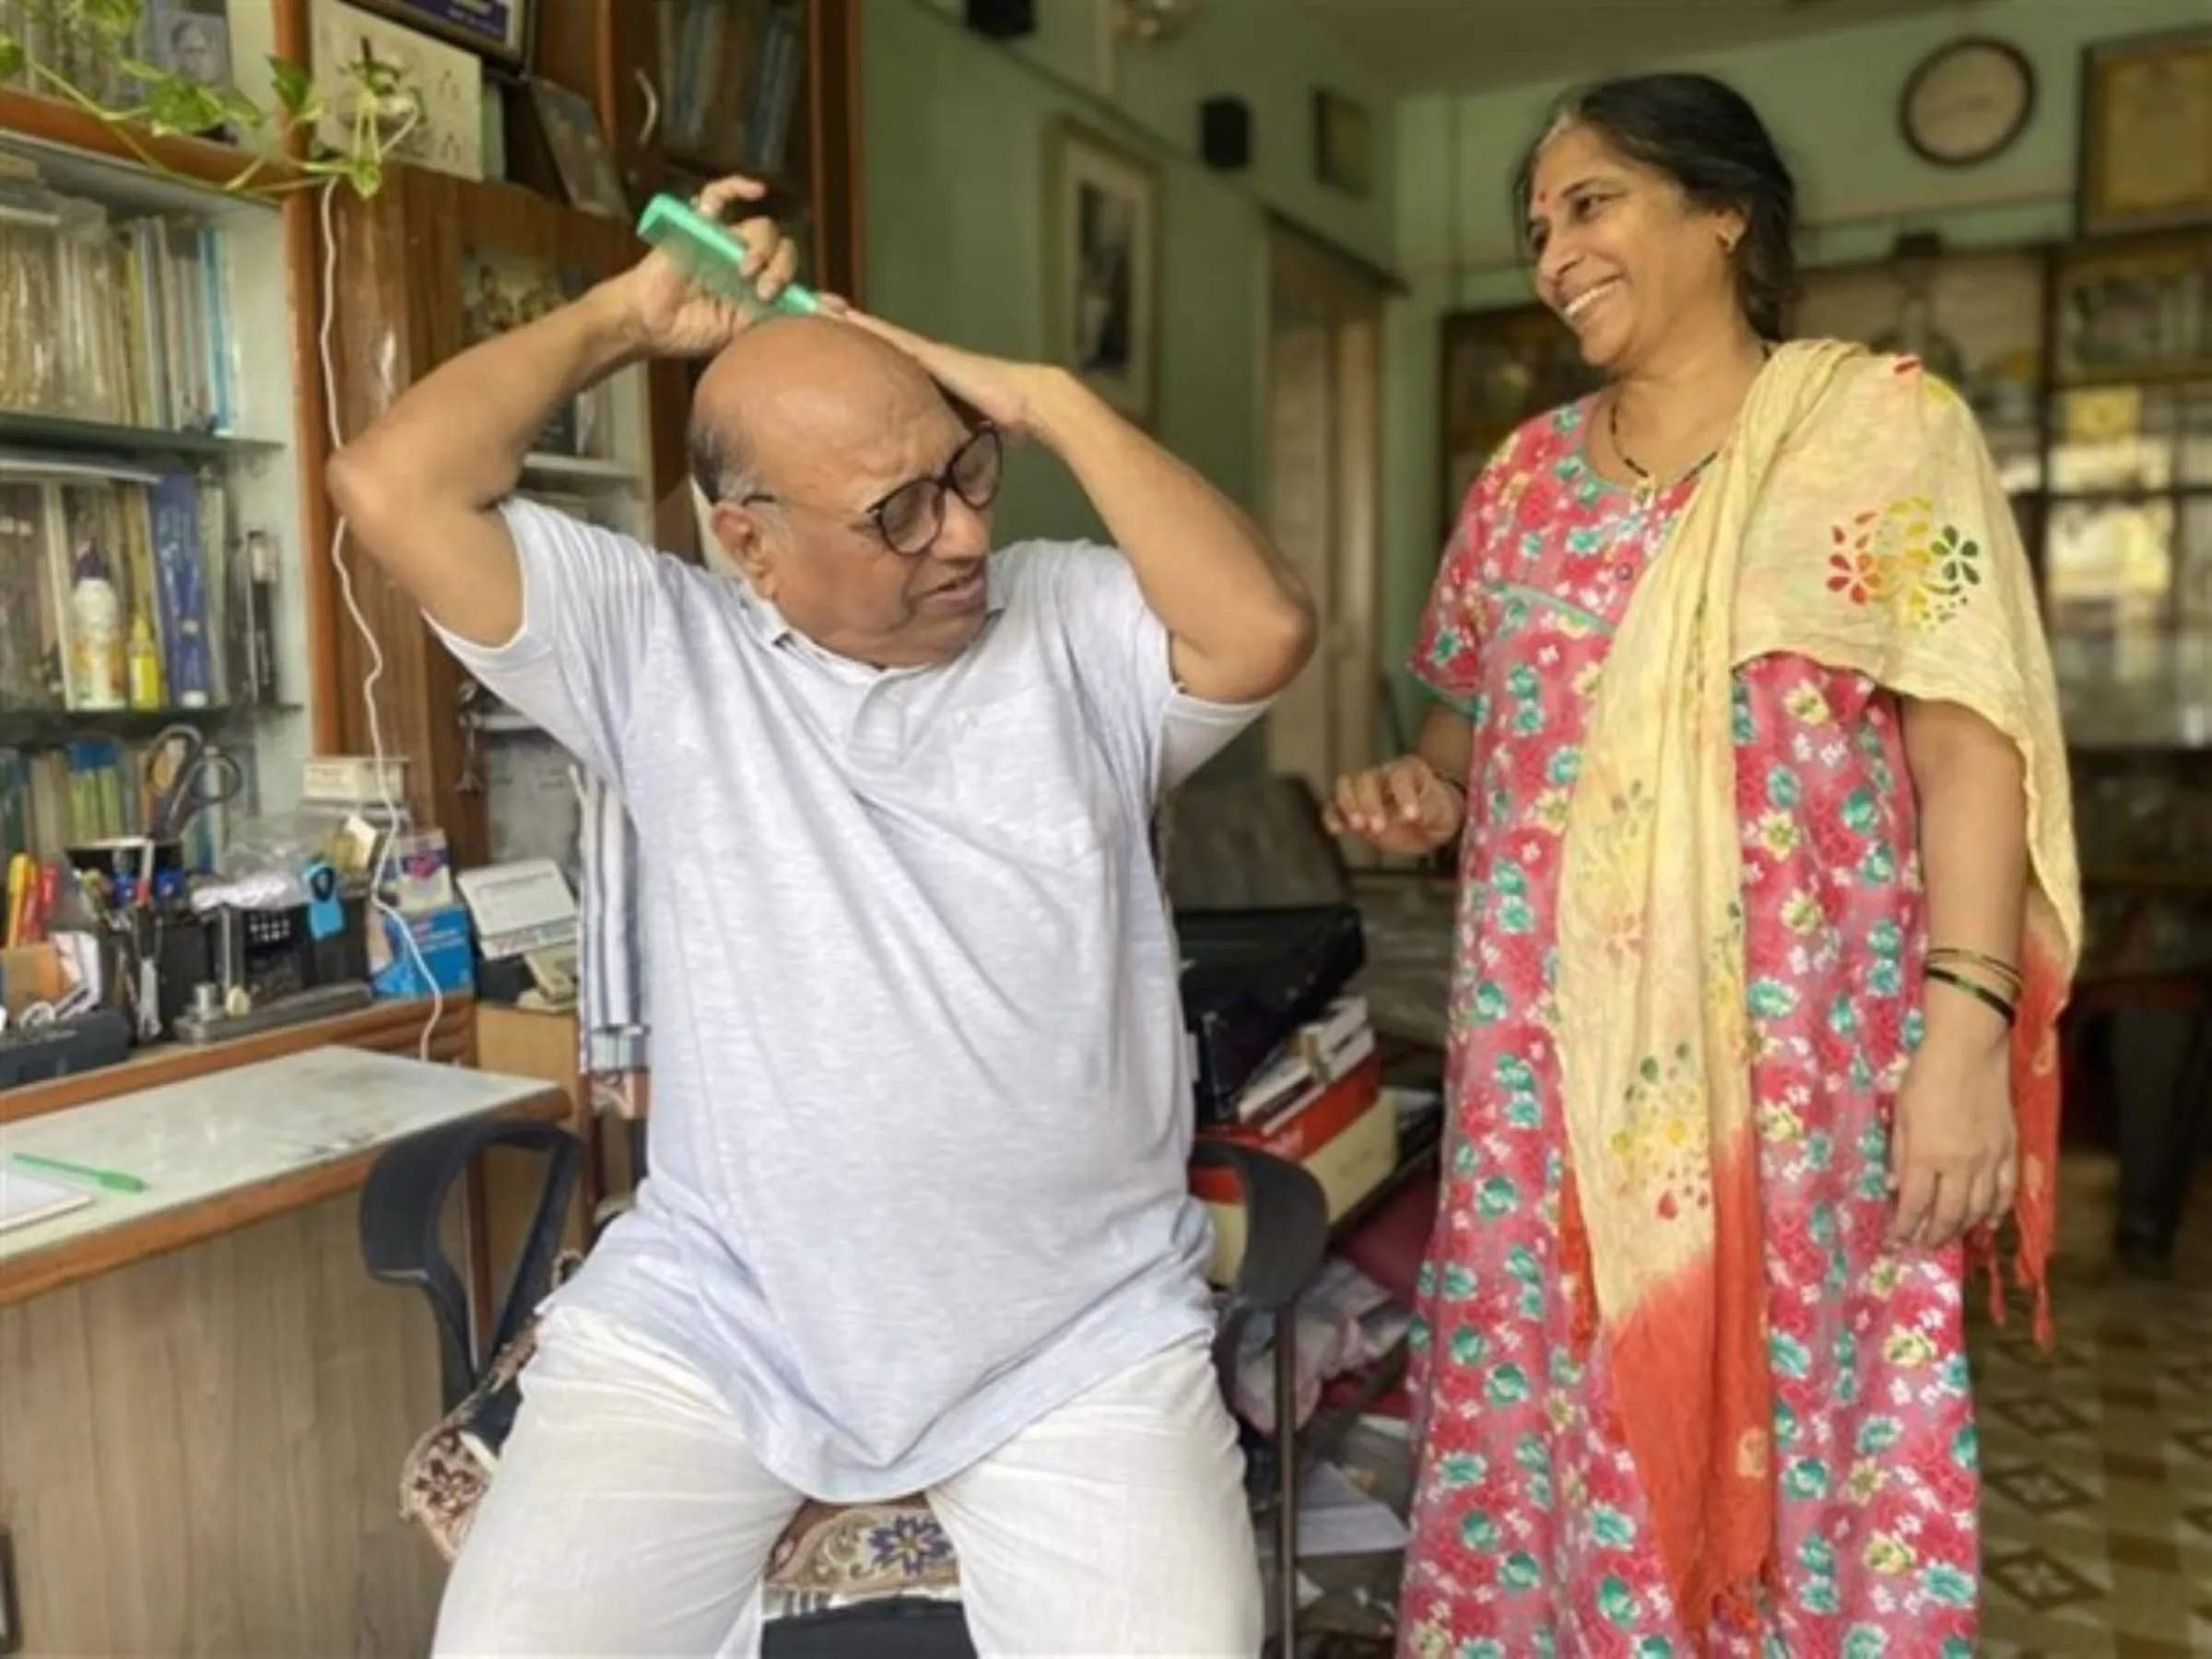 Dalit archivist Vijay Surwade and his wife Mangala talk in their apartment in Kalyan on May 11, 2023. Thomson Reuters Foundation/Vidhi Doshi